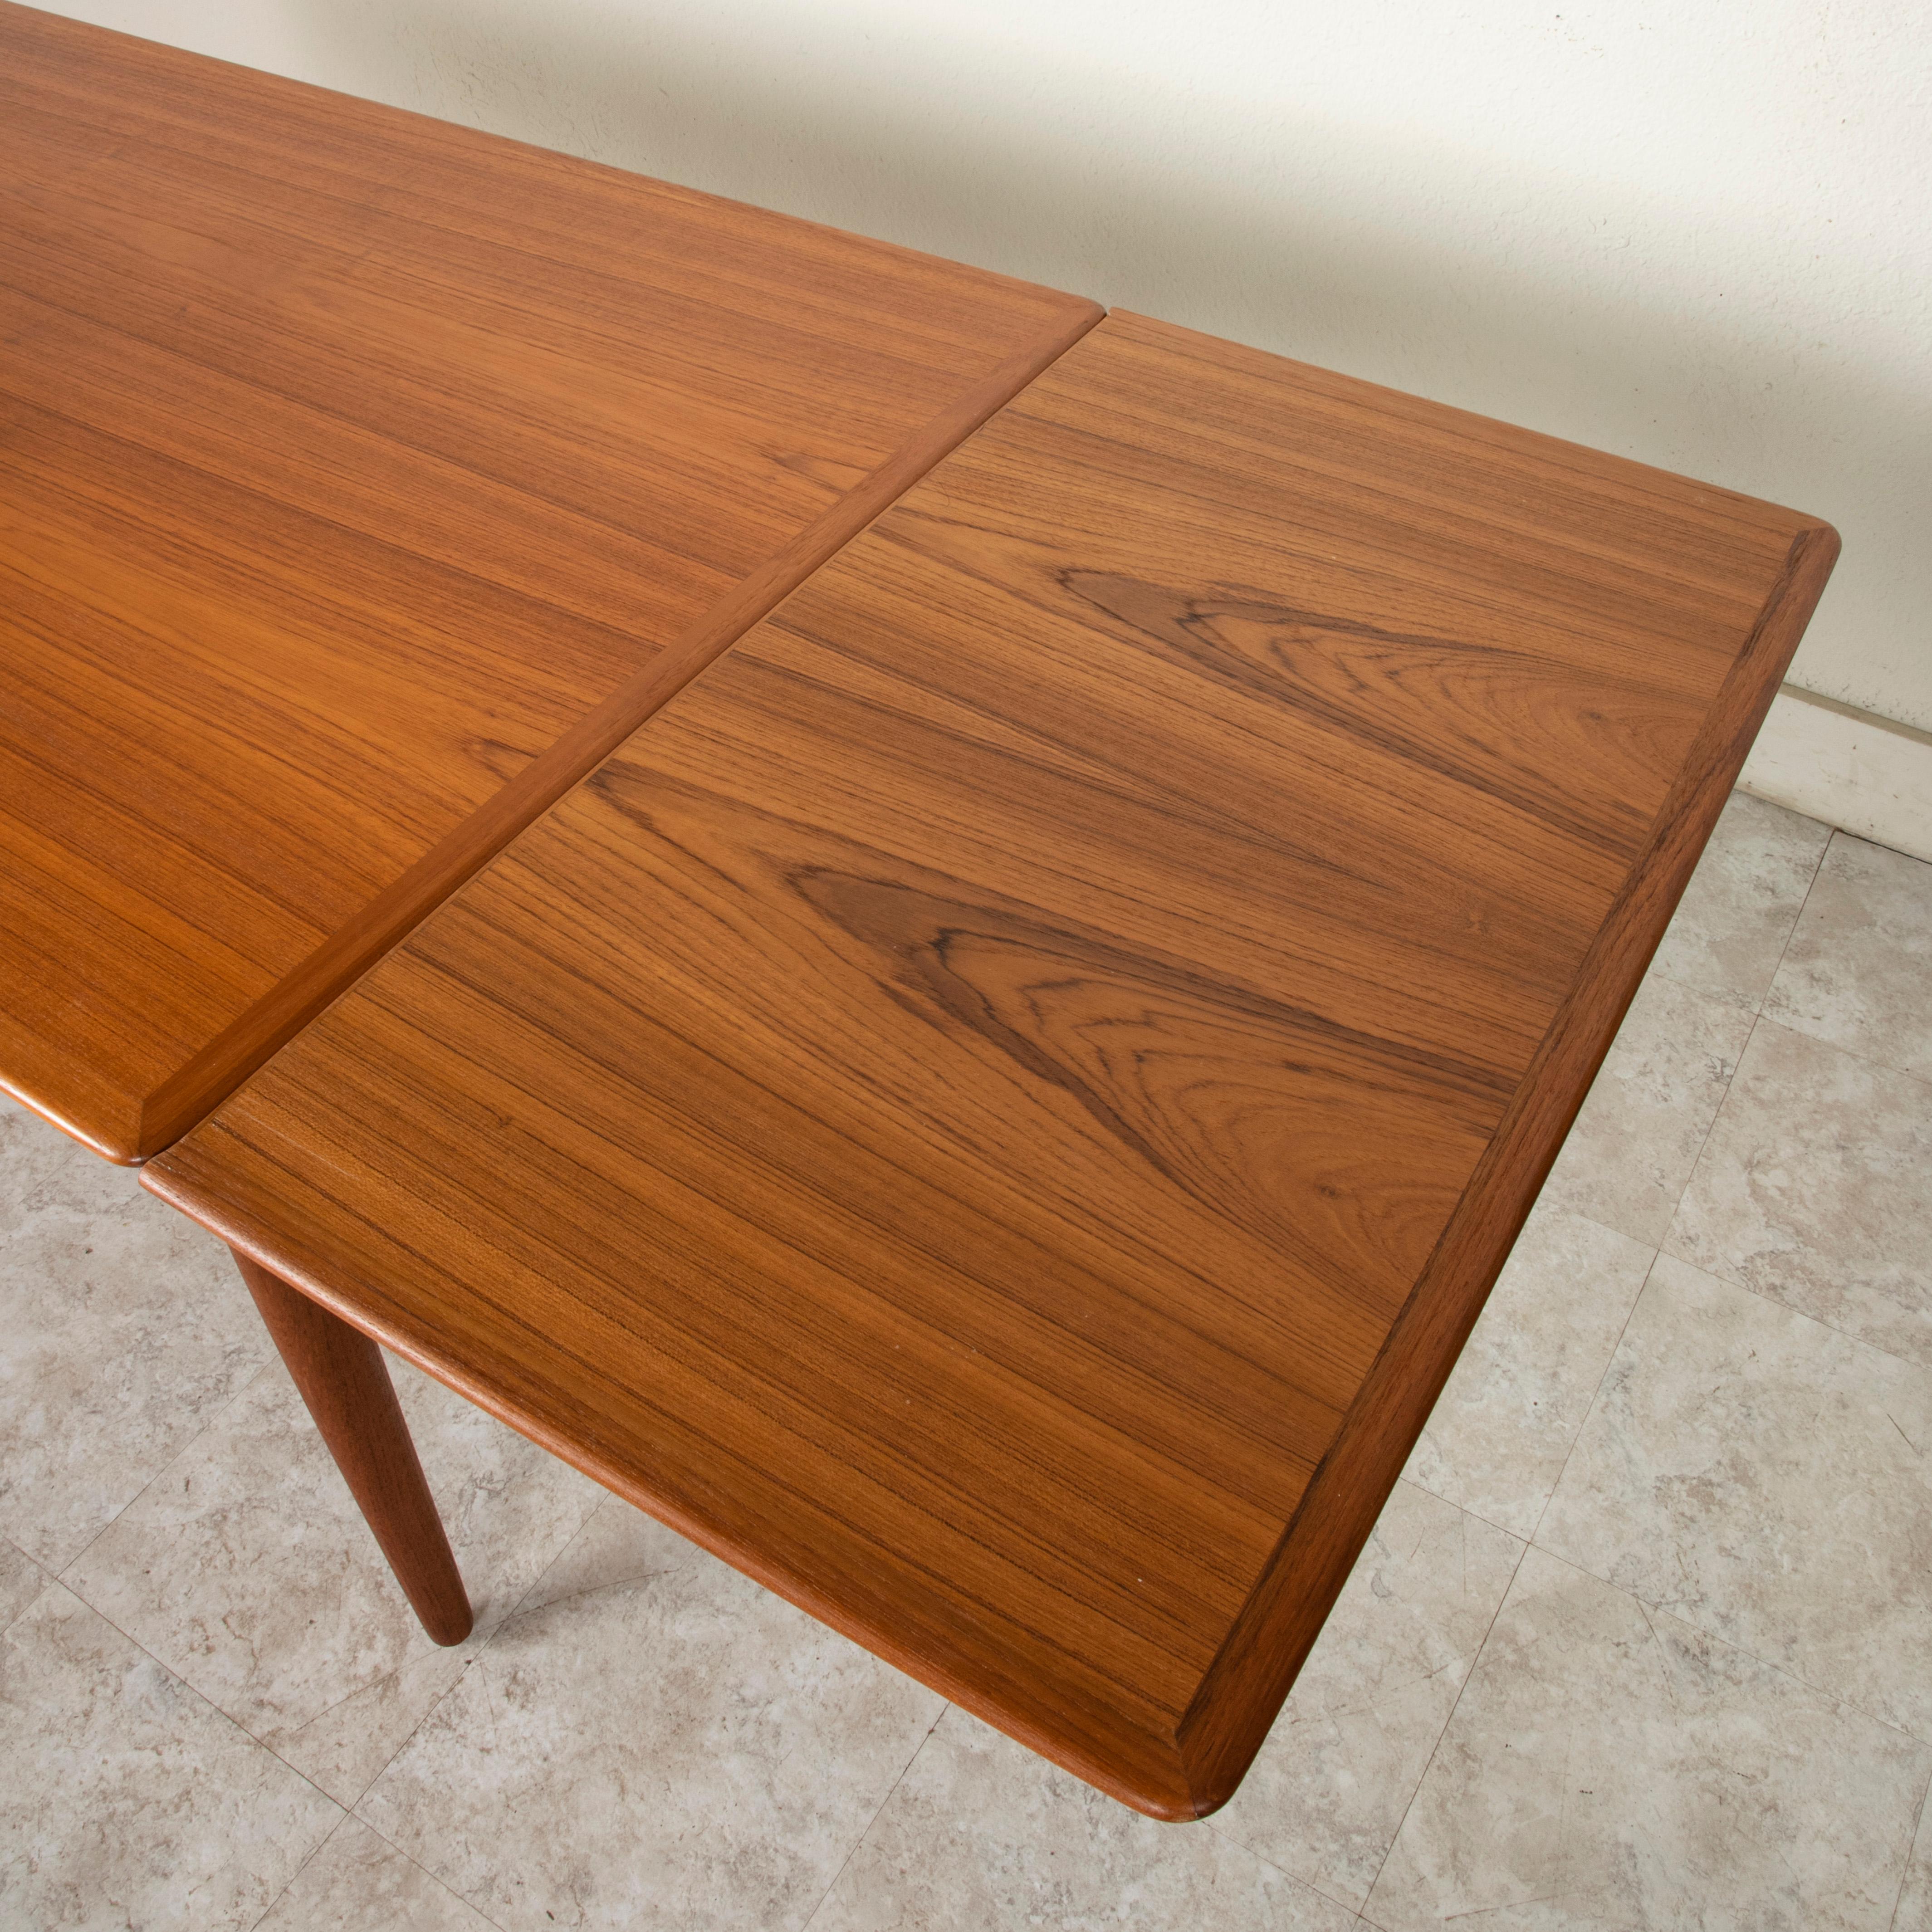 Midcentury Danish Modern Teak Dining Table with Draw Leaves 3